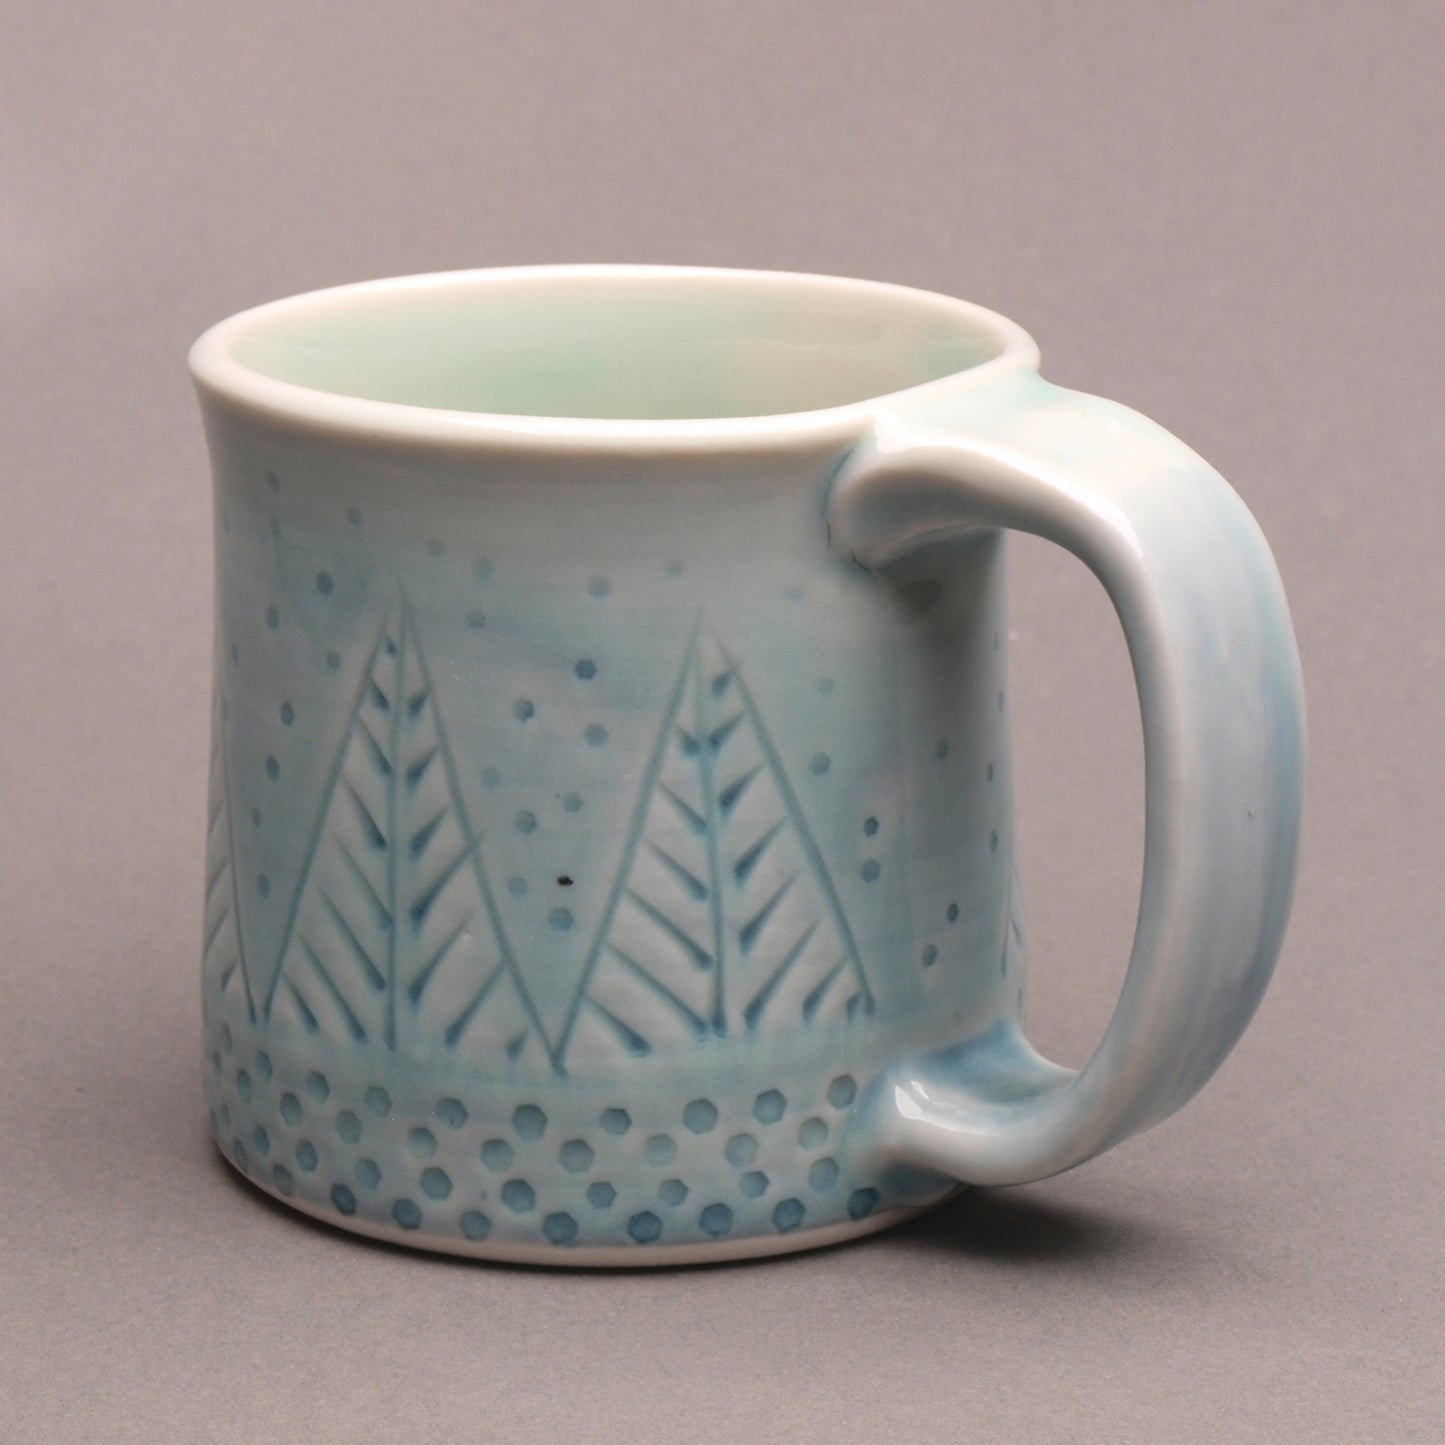 Handcrafted 'PARK CITY' Souvenir Mug with pinetrees by Mike Hays: Artistry, Comfort, and Durability